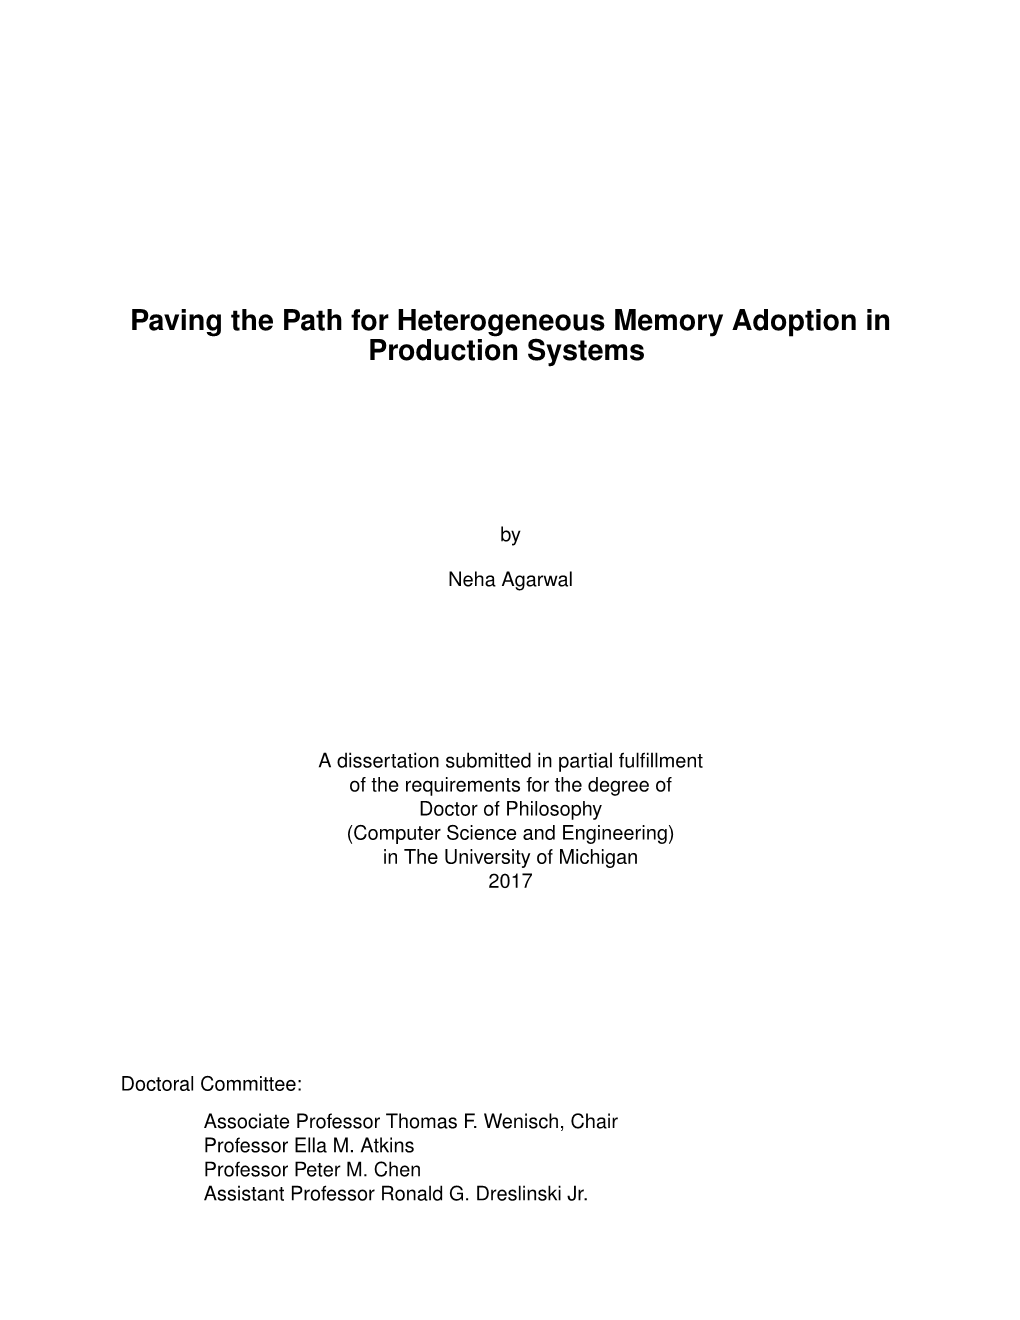 Paving the Path for Heterogeneous Memory Adoption in Production Systems